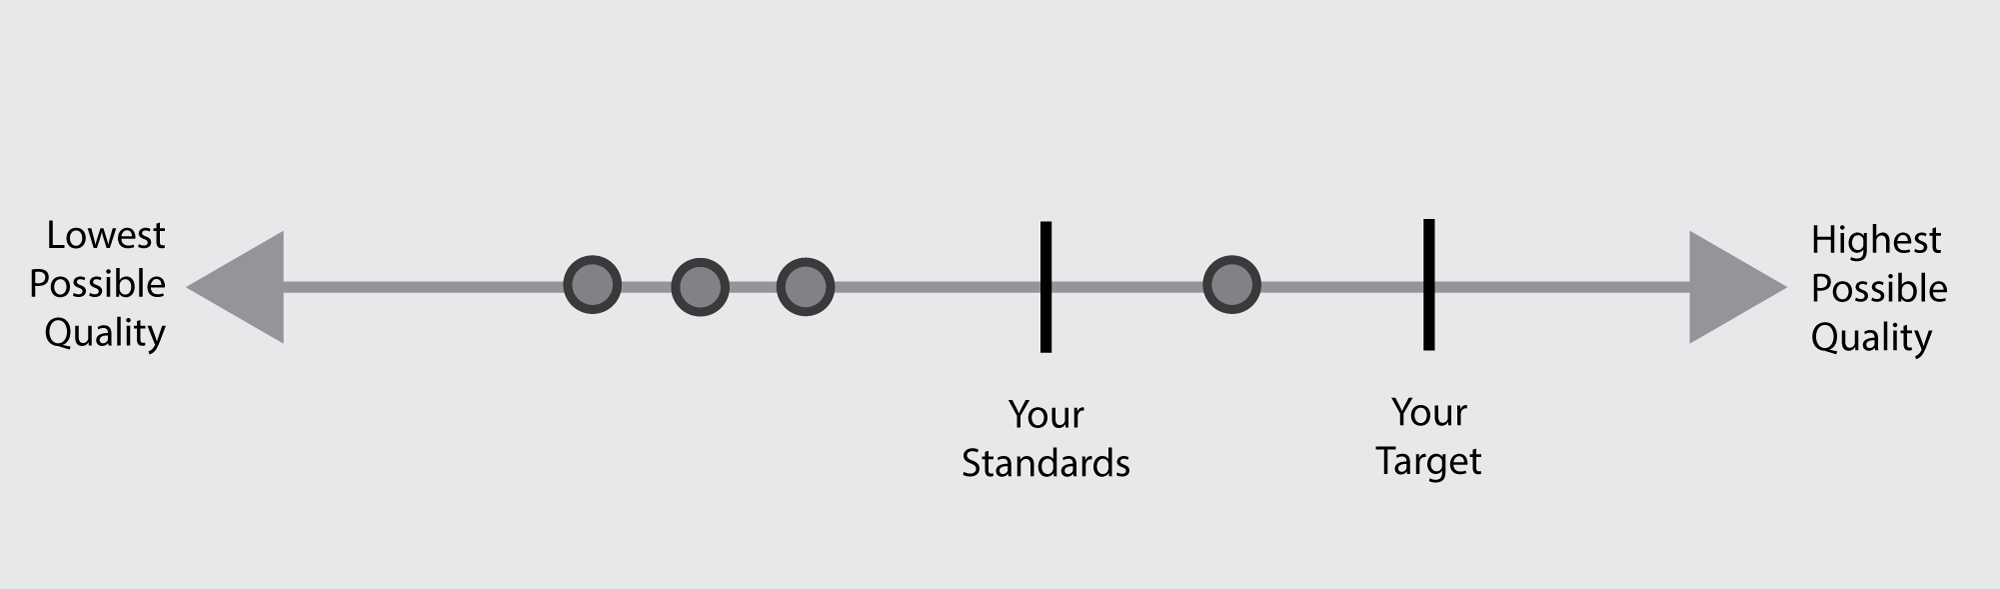 Don’t just consider your written standards and the target standards.